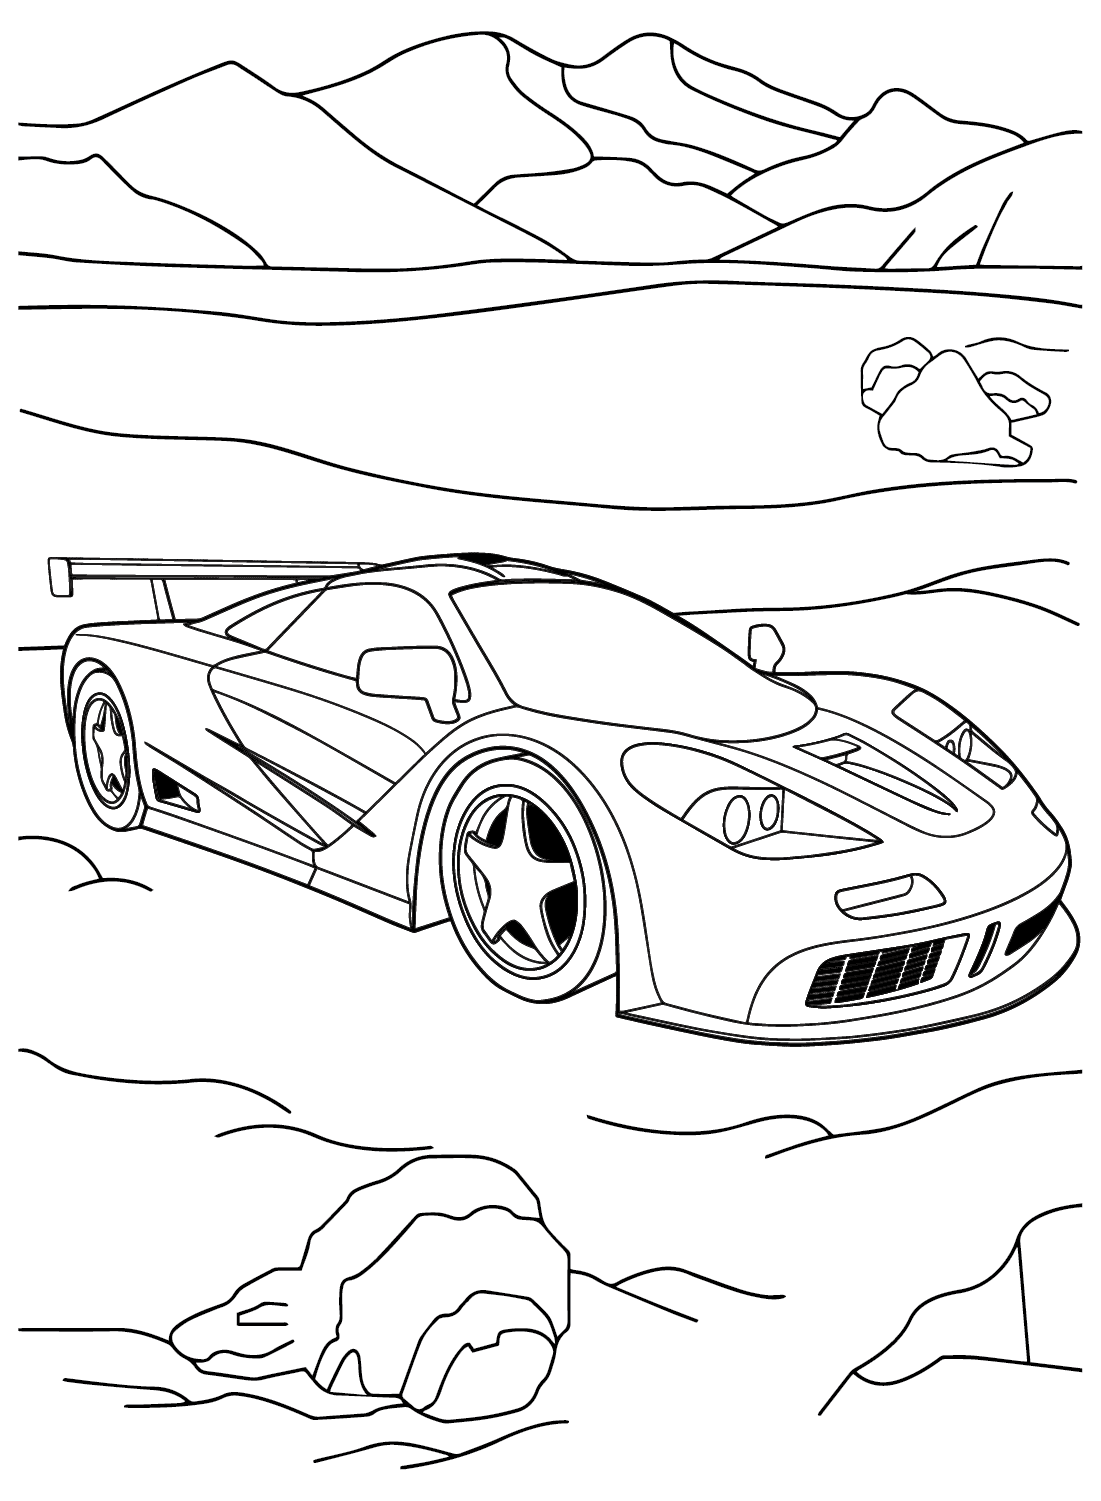 Ferrari Images to Color - Free Printable Coloring Pages